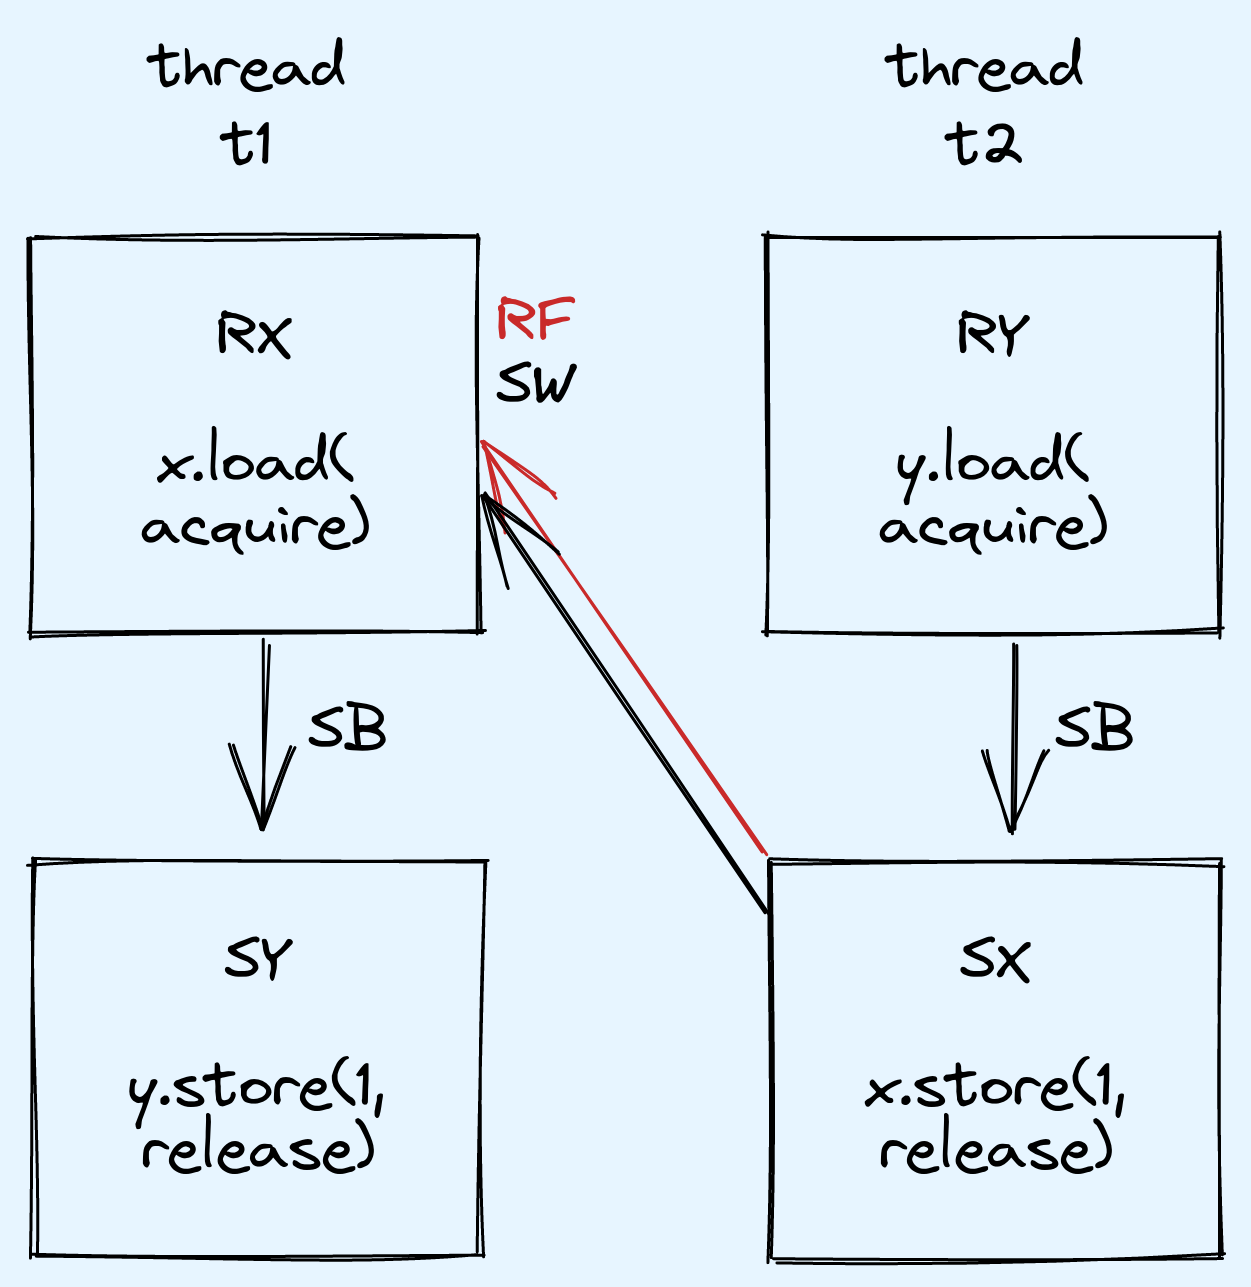 t2 synchronizes-with t1 due to the relation RX reads-from SX, and RX and SX are acquire and release operations respectively.